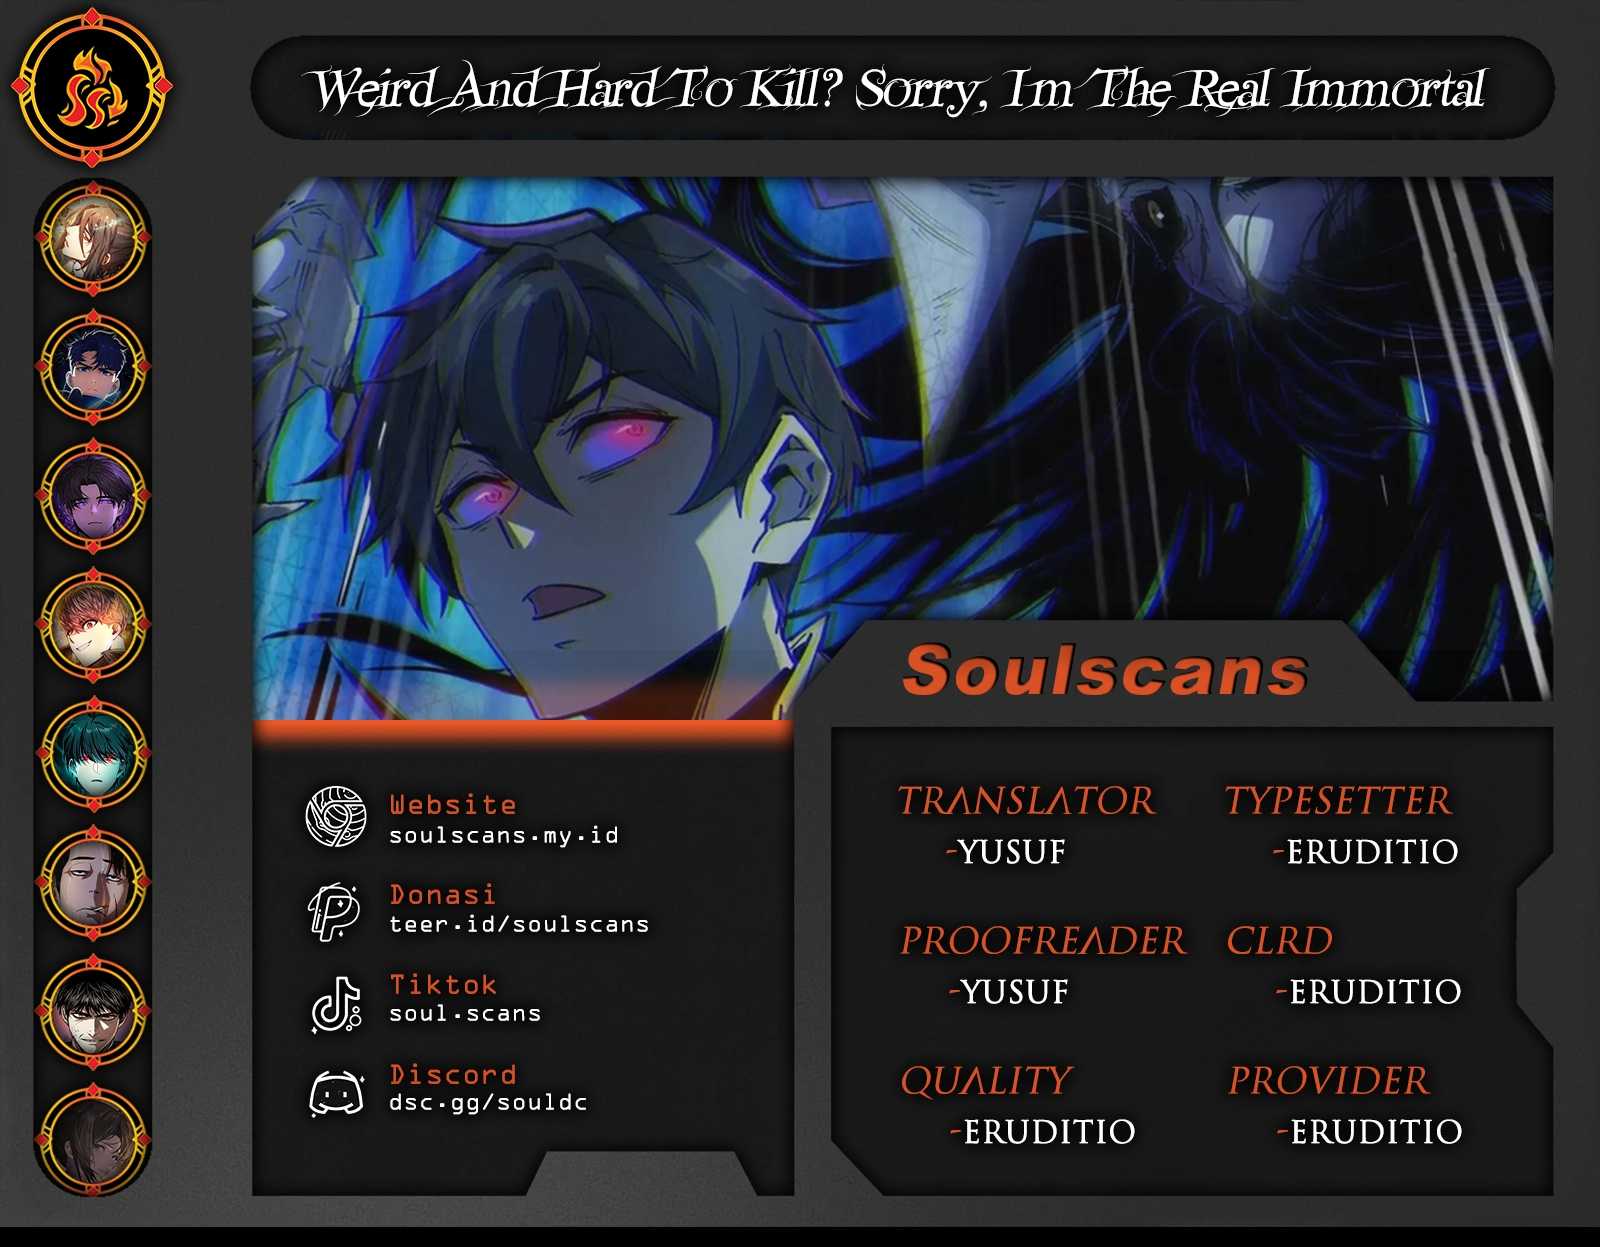 Weird And Hard To Kill Sorry, I’m The Real Immortal Chapter 24